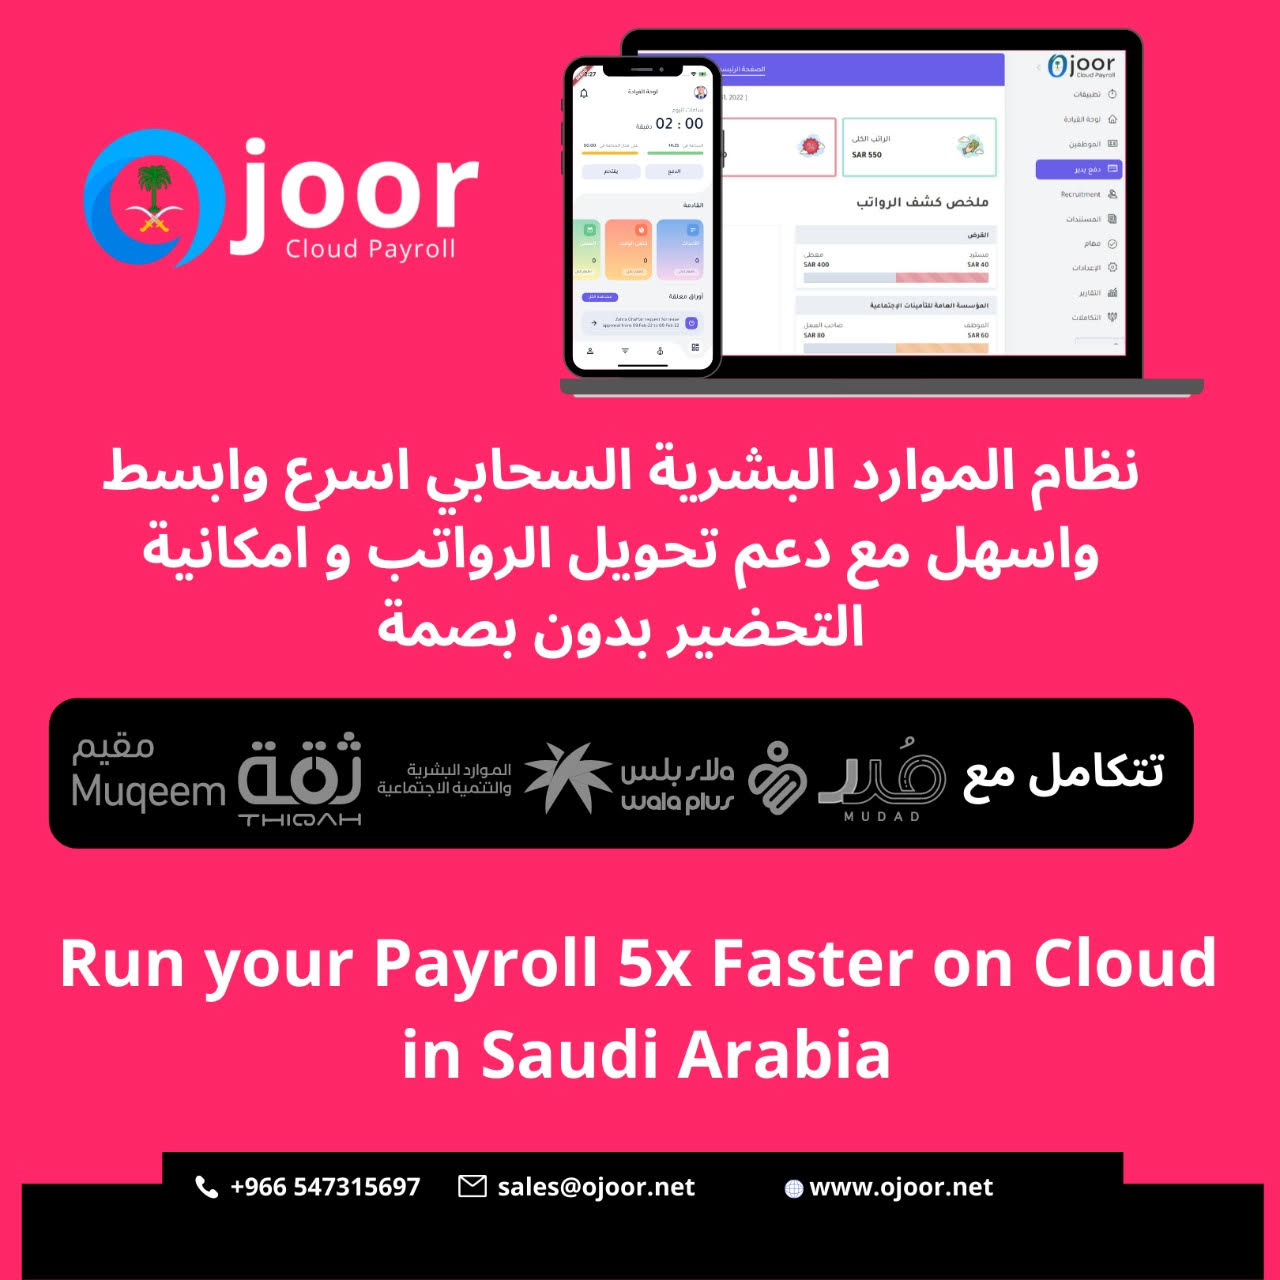 5 Reasons Why Your Organisation needs a Payroll System in Saudi?